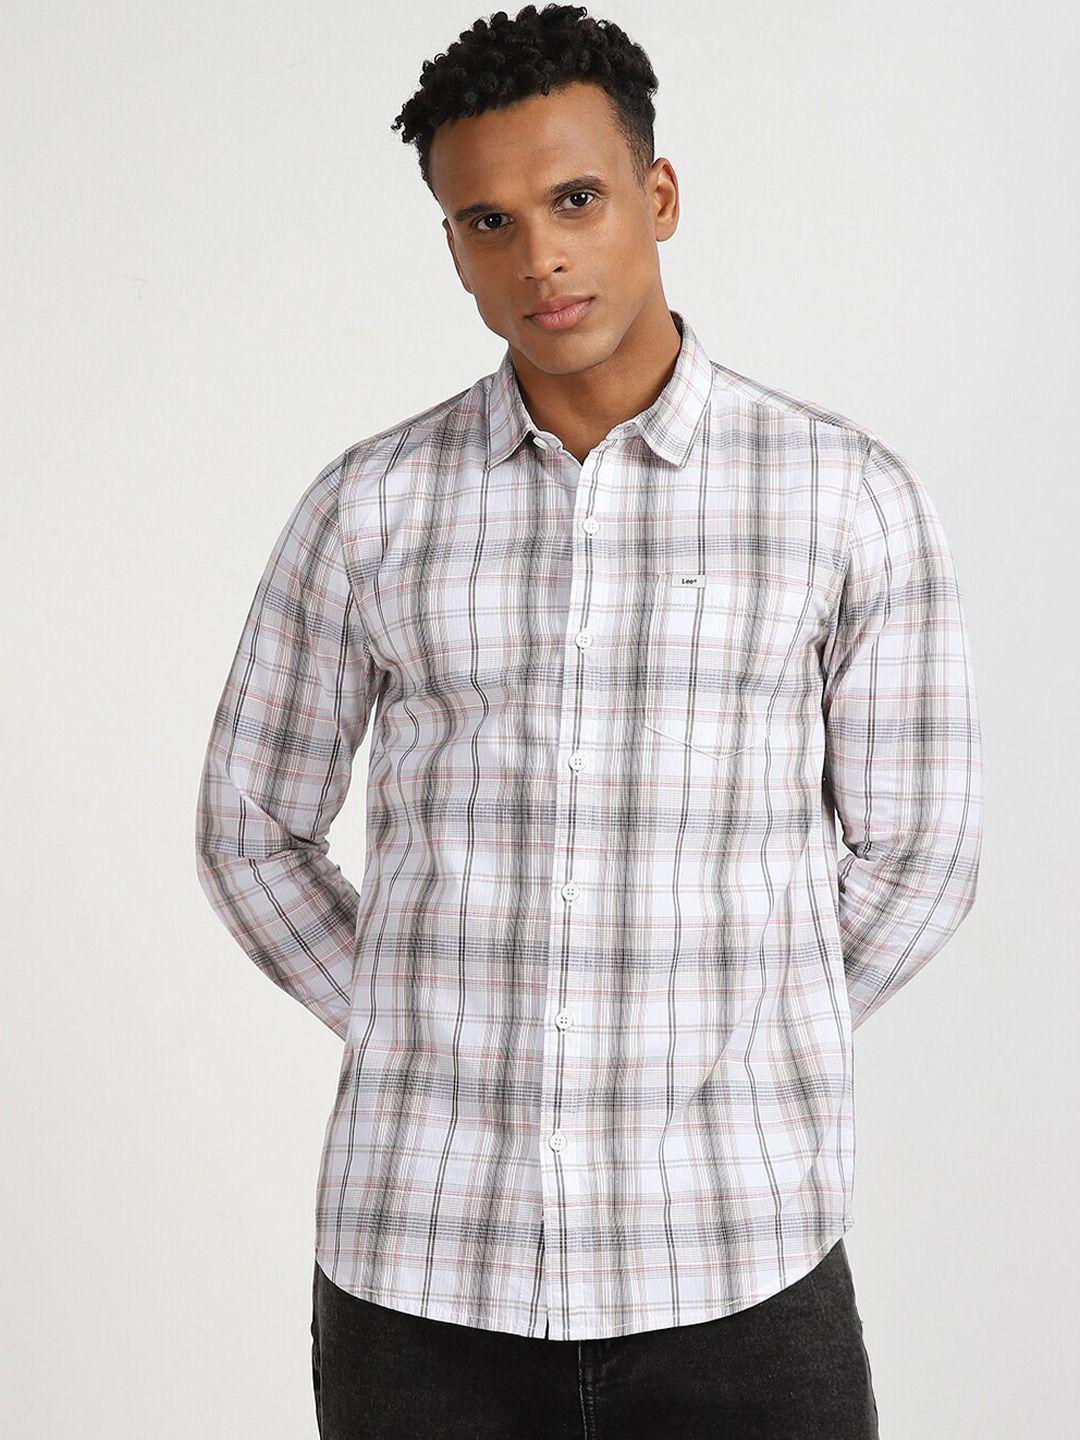 lee checked spread collar slim fit cotton casual shirt